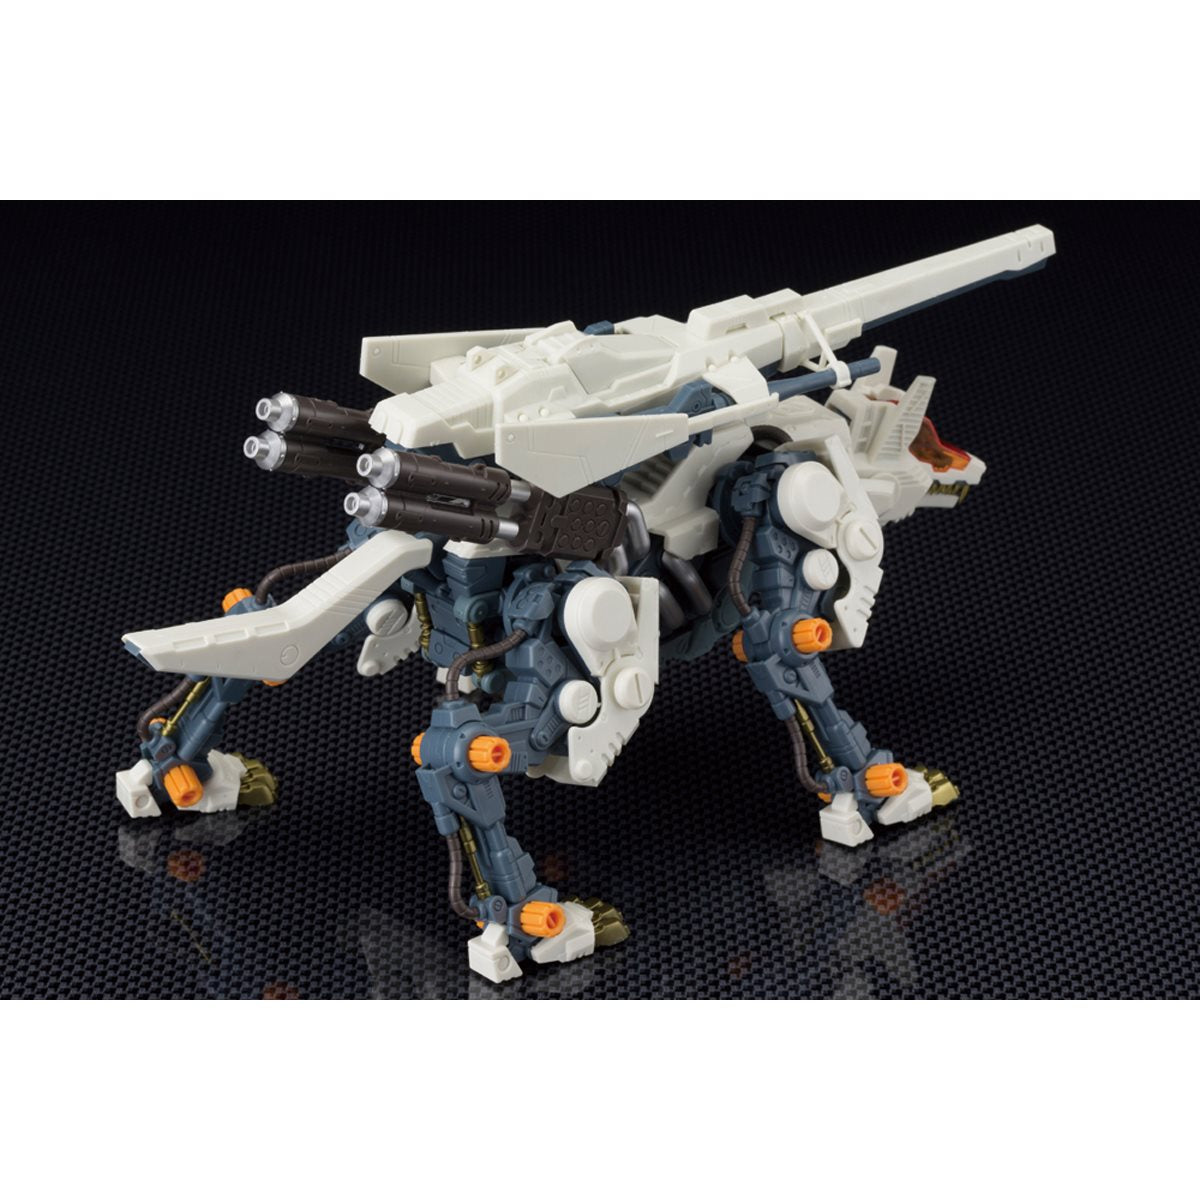 1/72 Scale ZOIDS RHI-3 Command Wolf Repackage Ver.